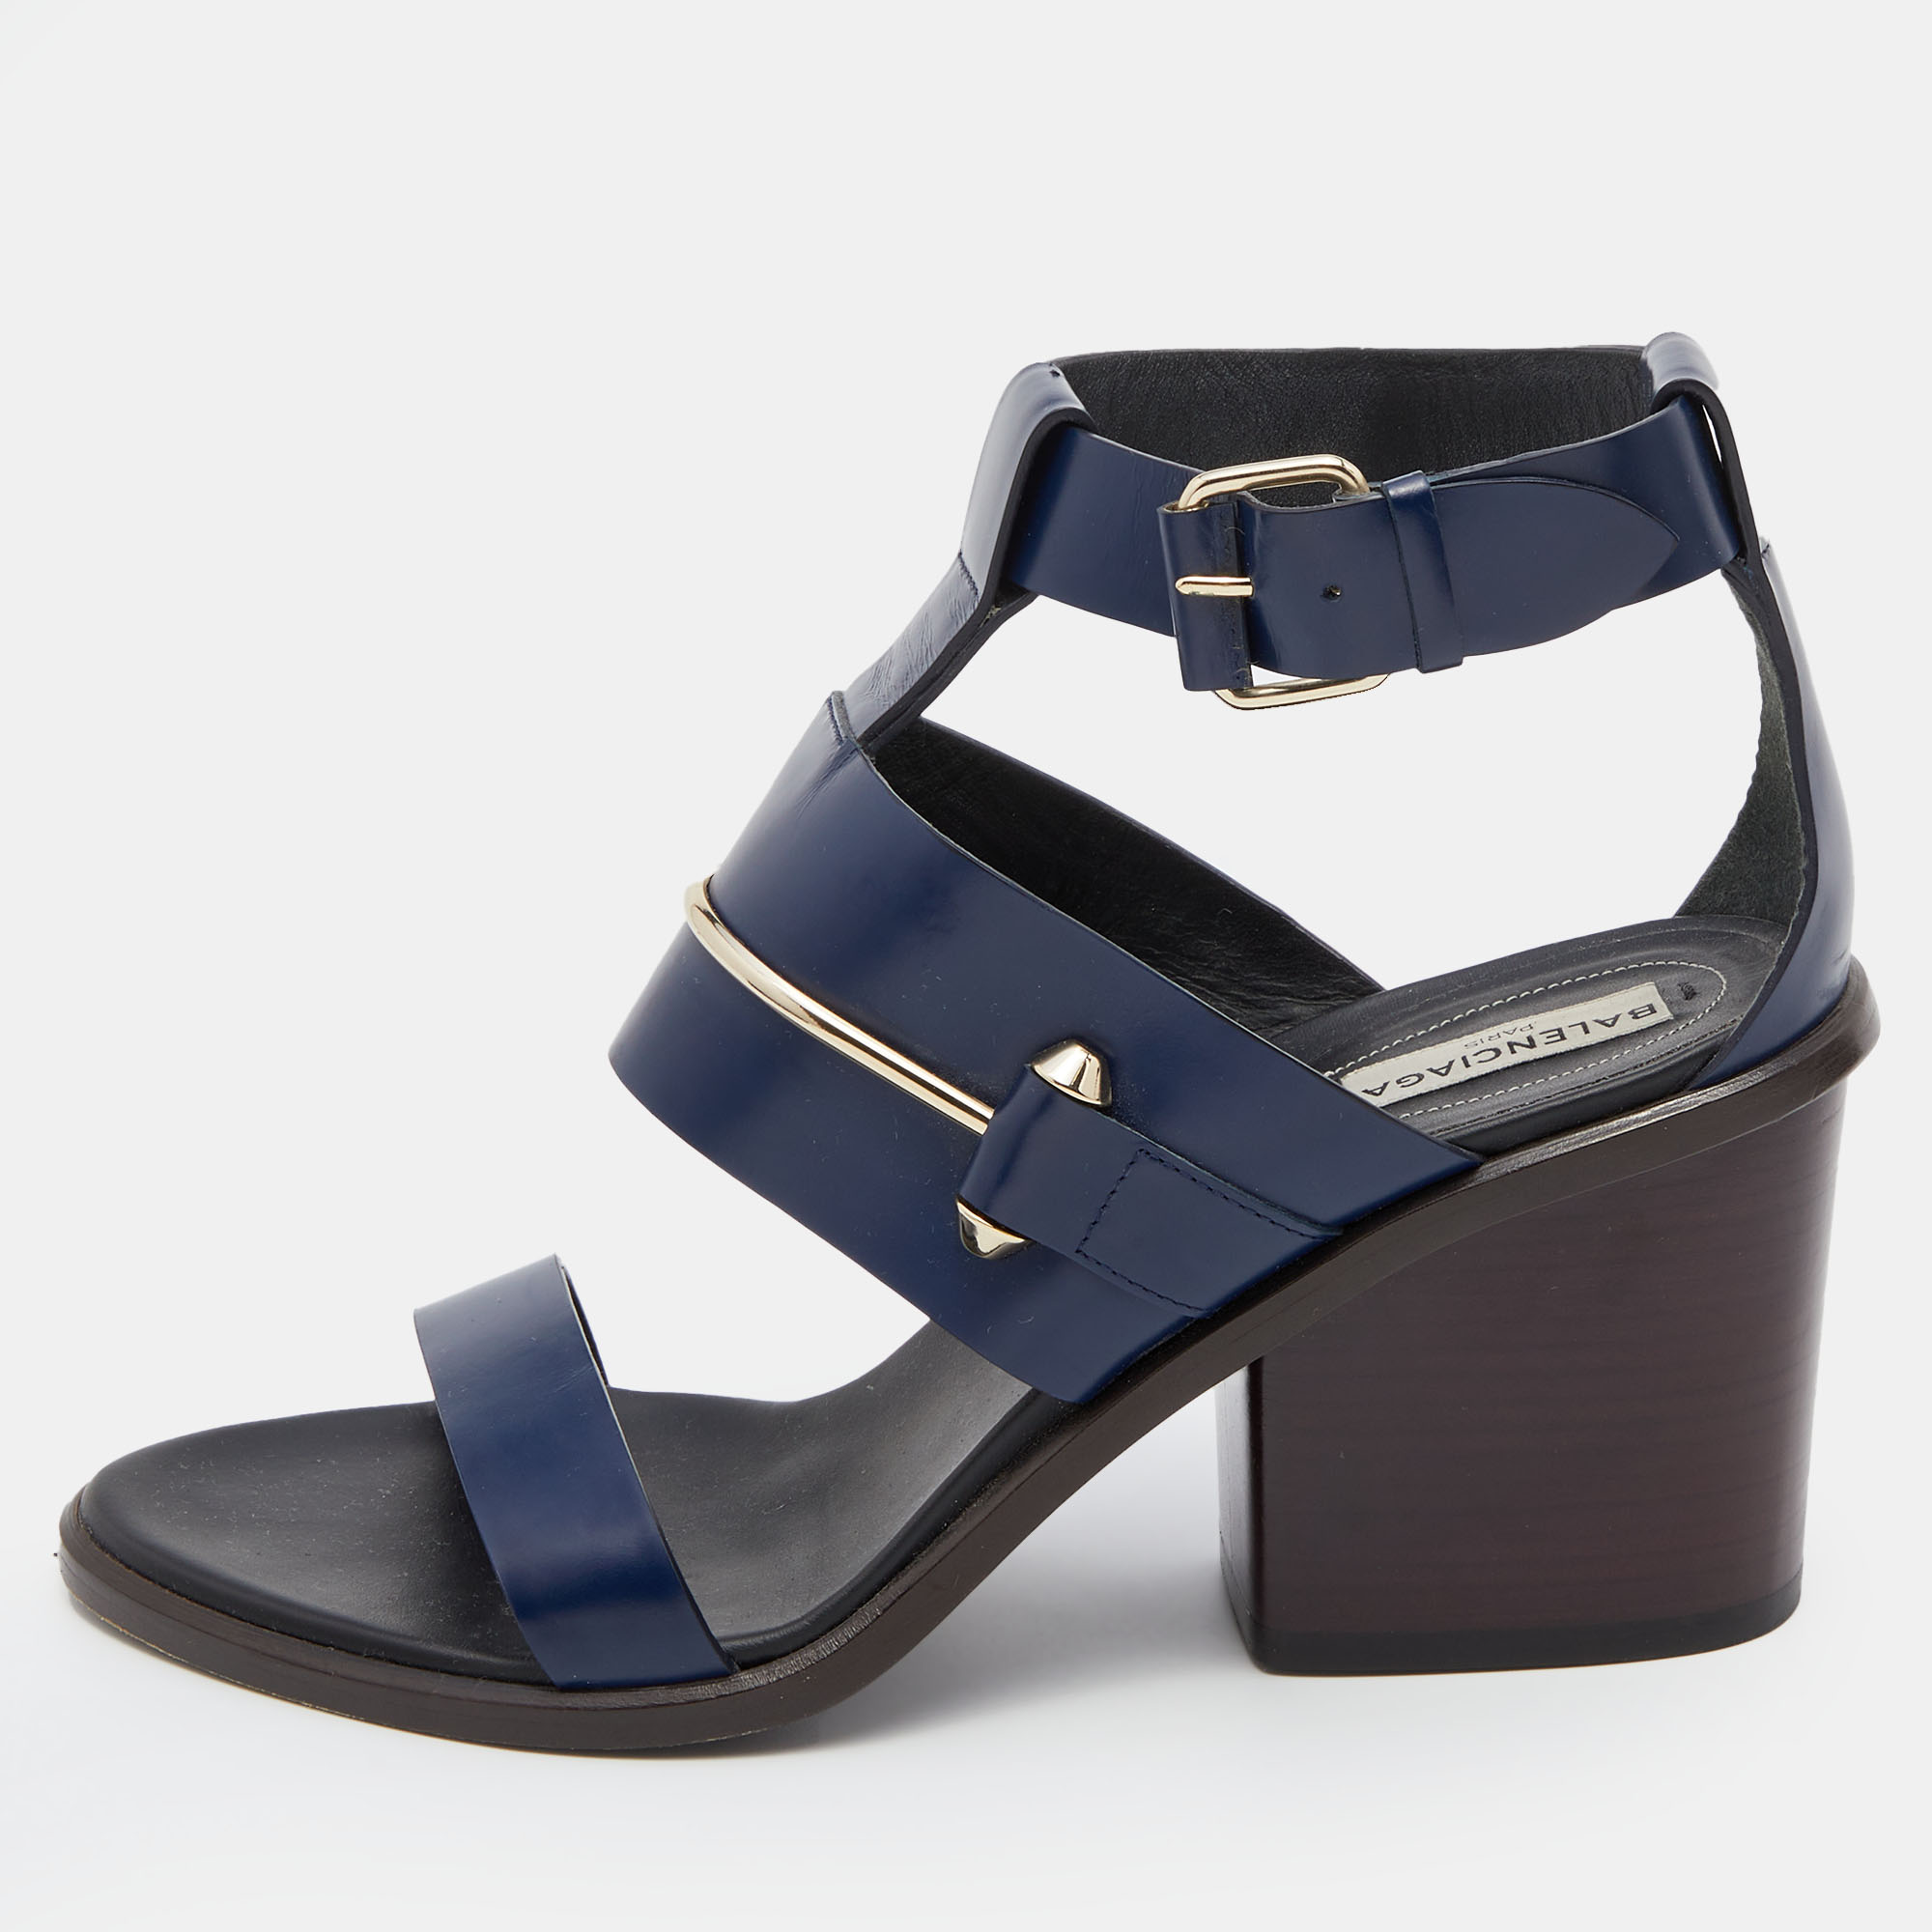 Pre-owned Balenciaga Navy Blue Leather Ankle Strap Sandals Size 37